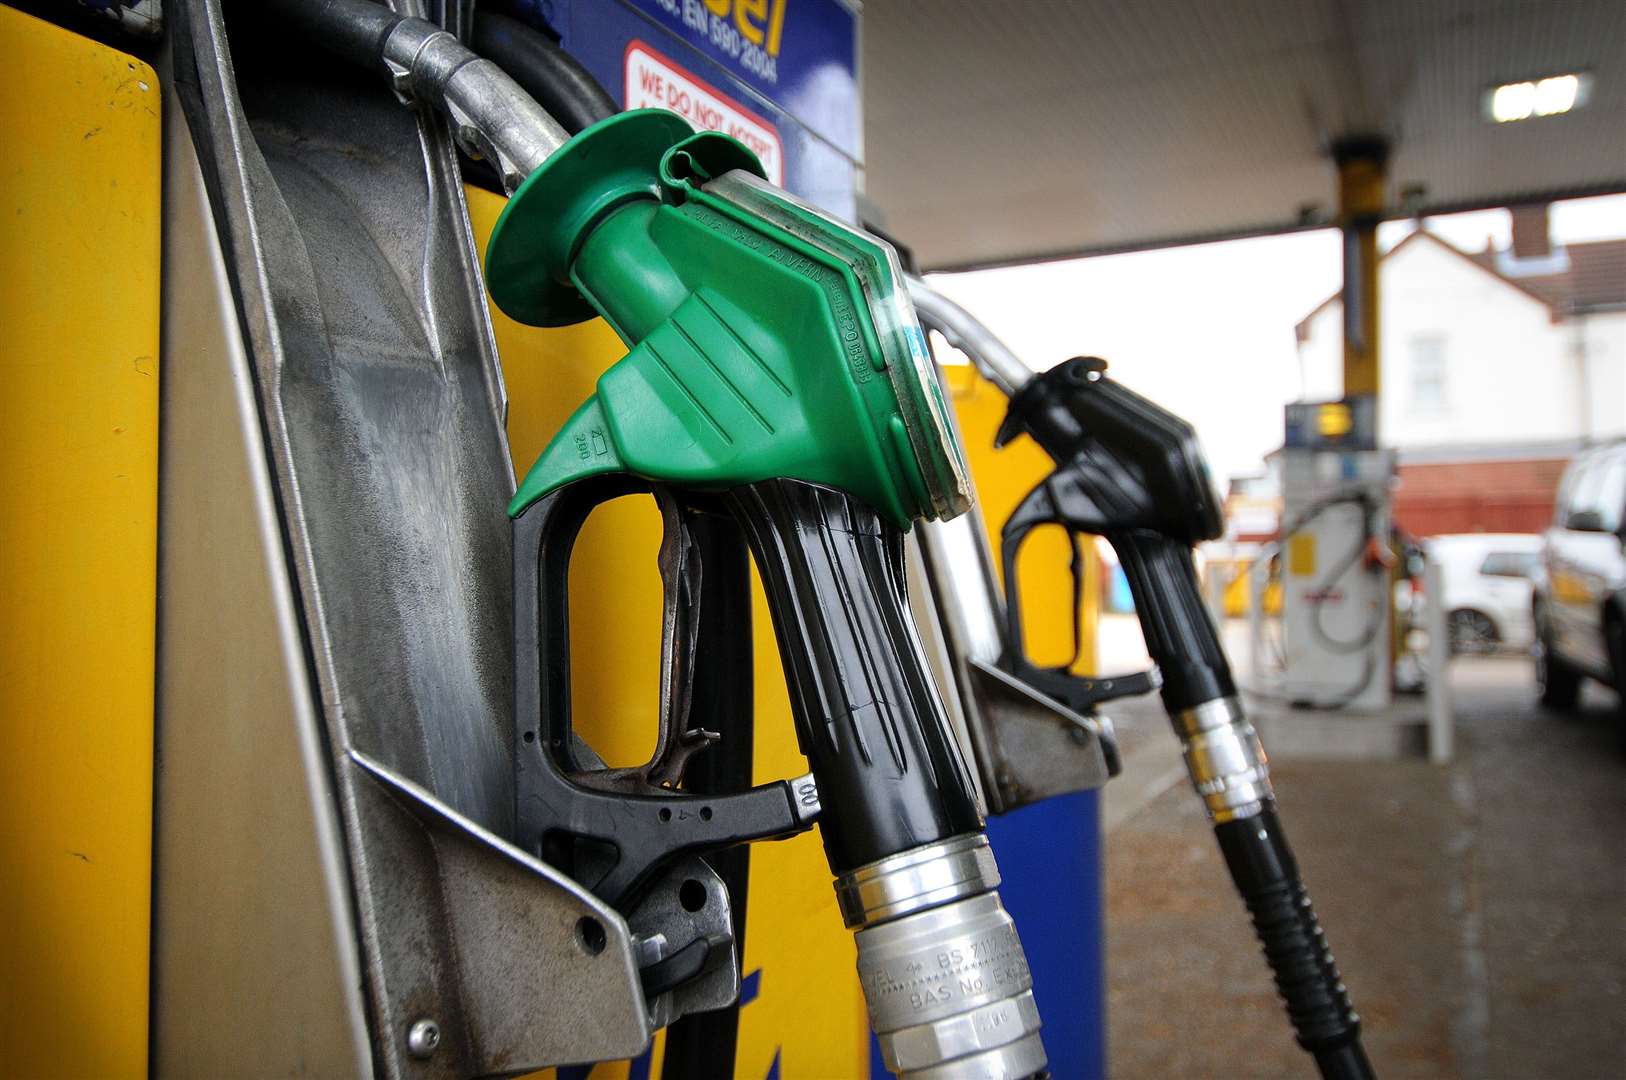 Petrol prices have risen...but perhaps not as much as you may think